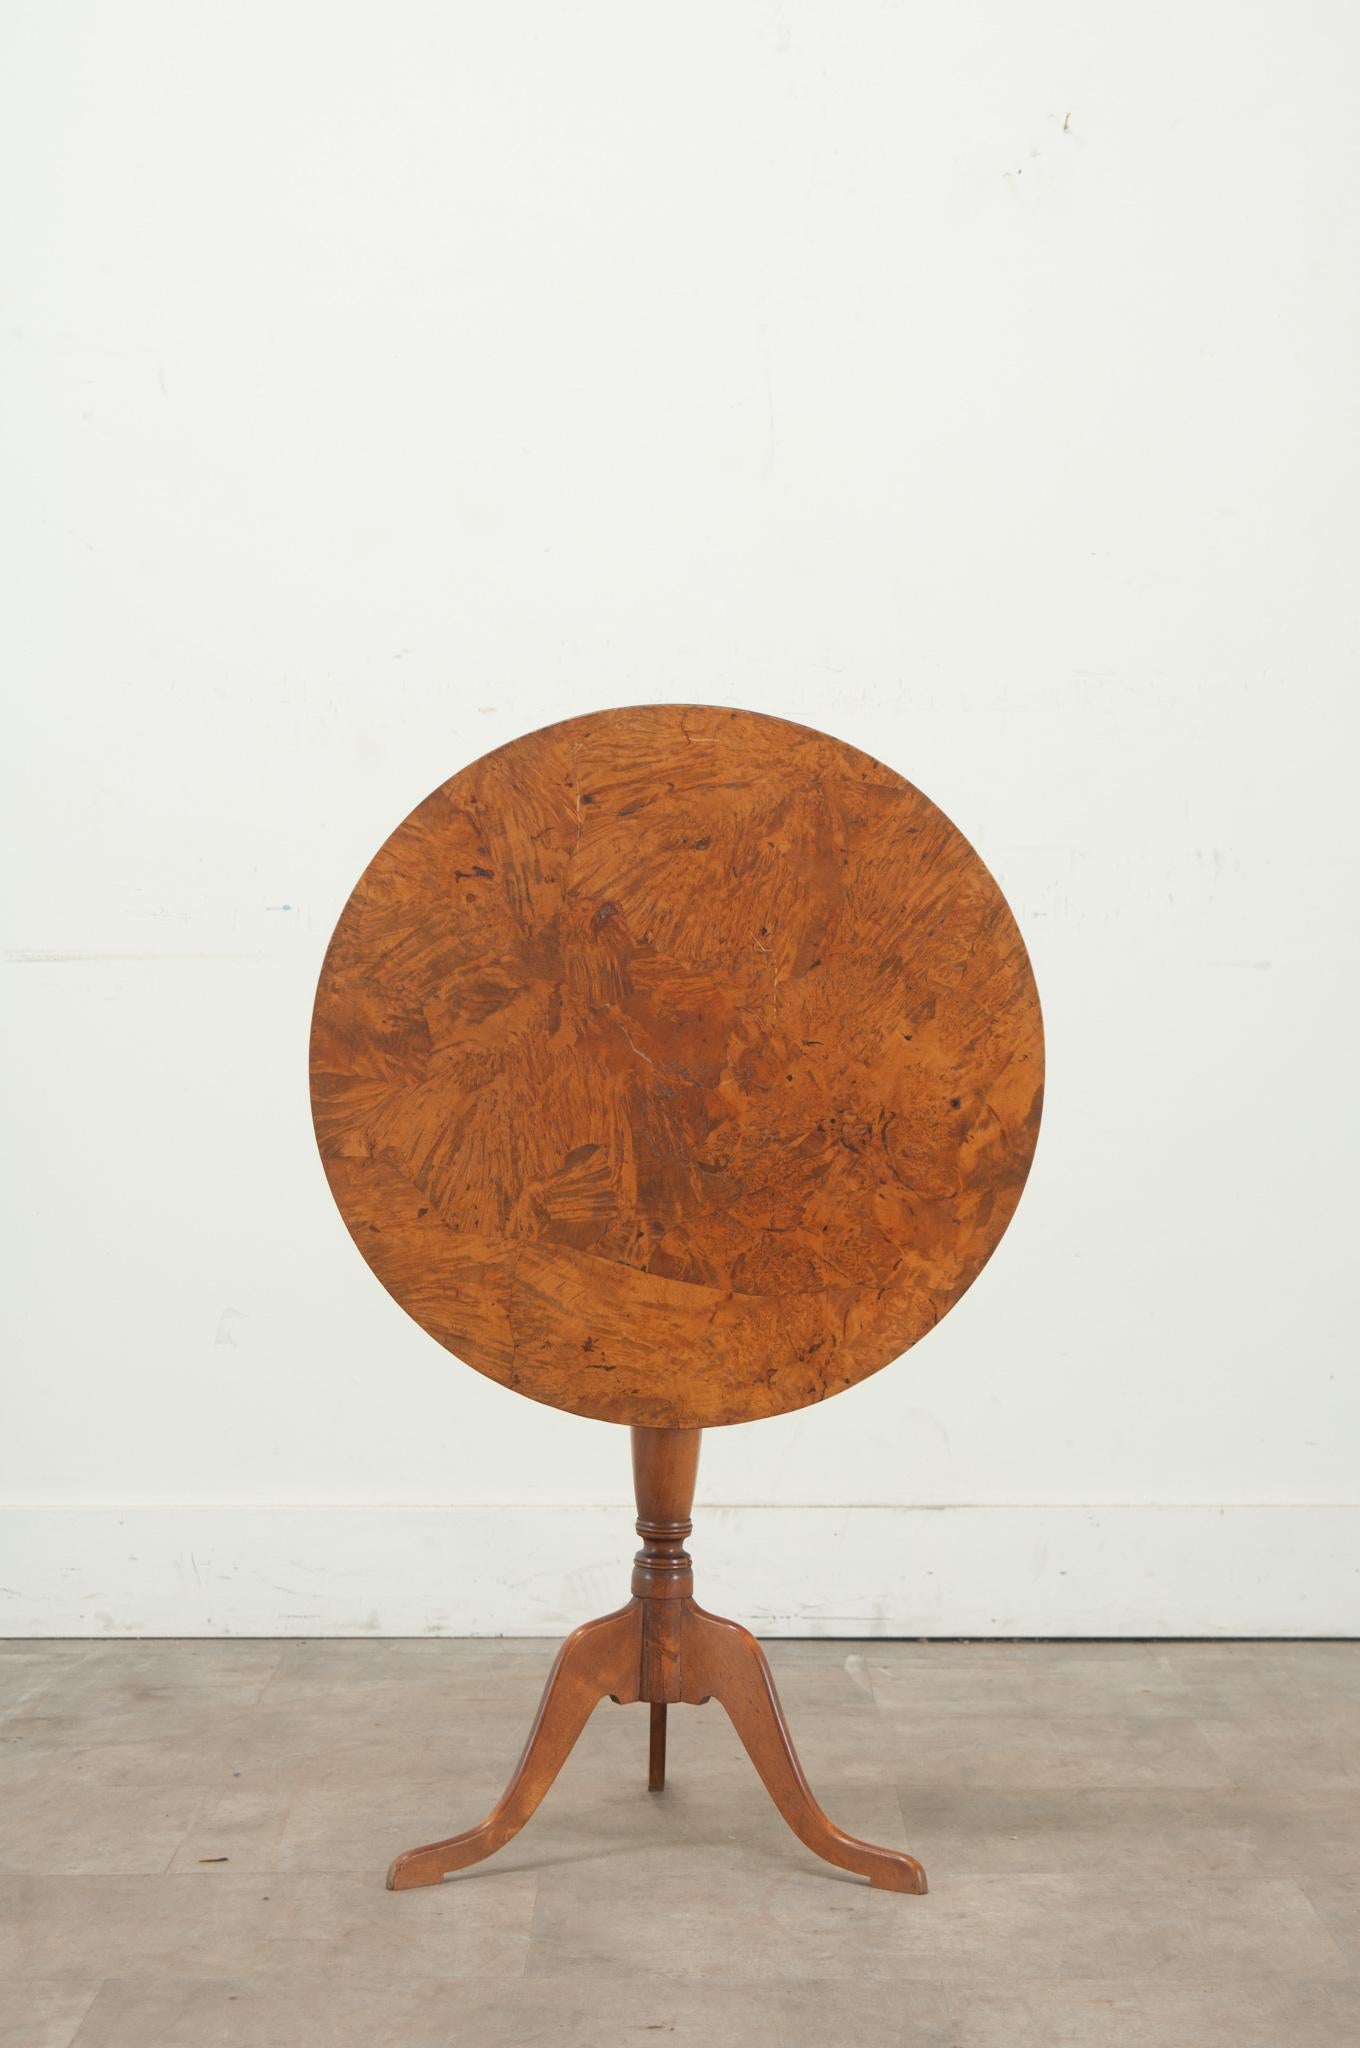 A 19th Century Swedish tilt-top table made of birch wood. The burl birch circular top rests over a pedestal base with three splayed legs. Cleaned and polished with a French paste wax this antique is ready for your immediate use. Be sure to view the